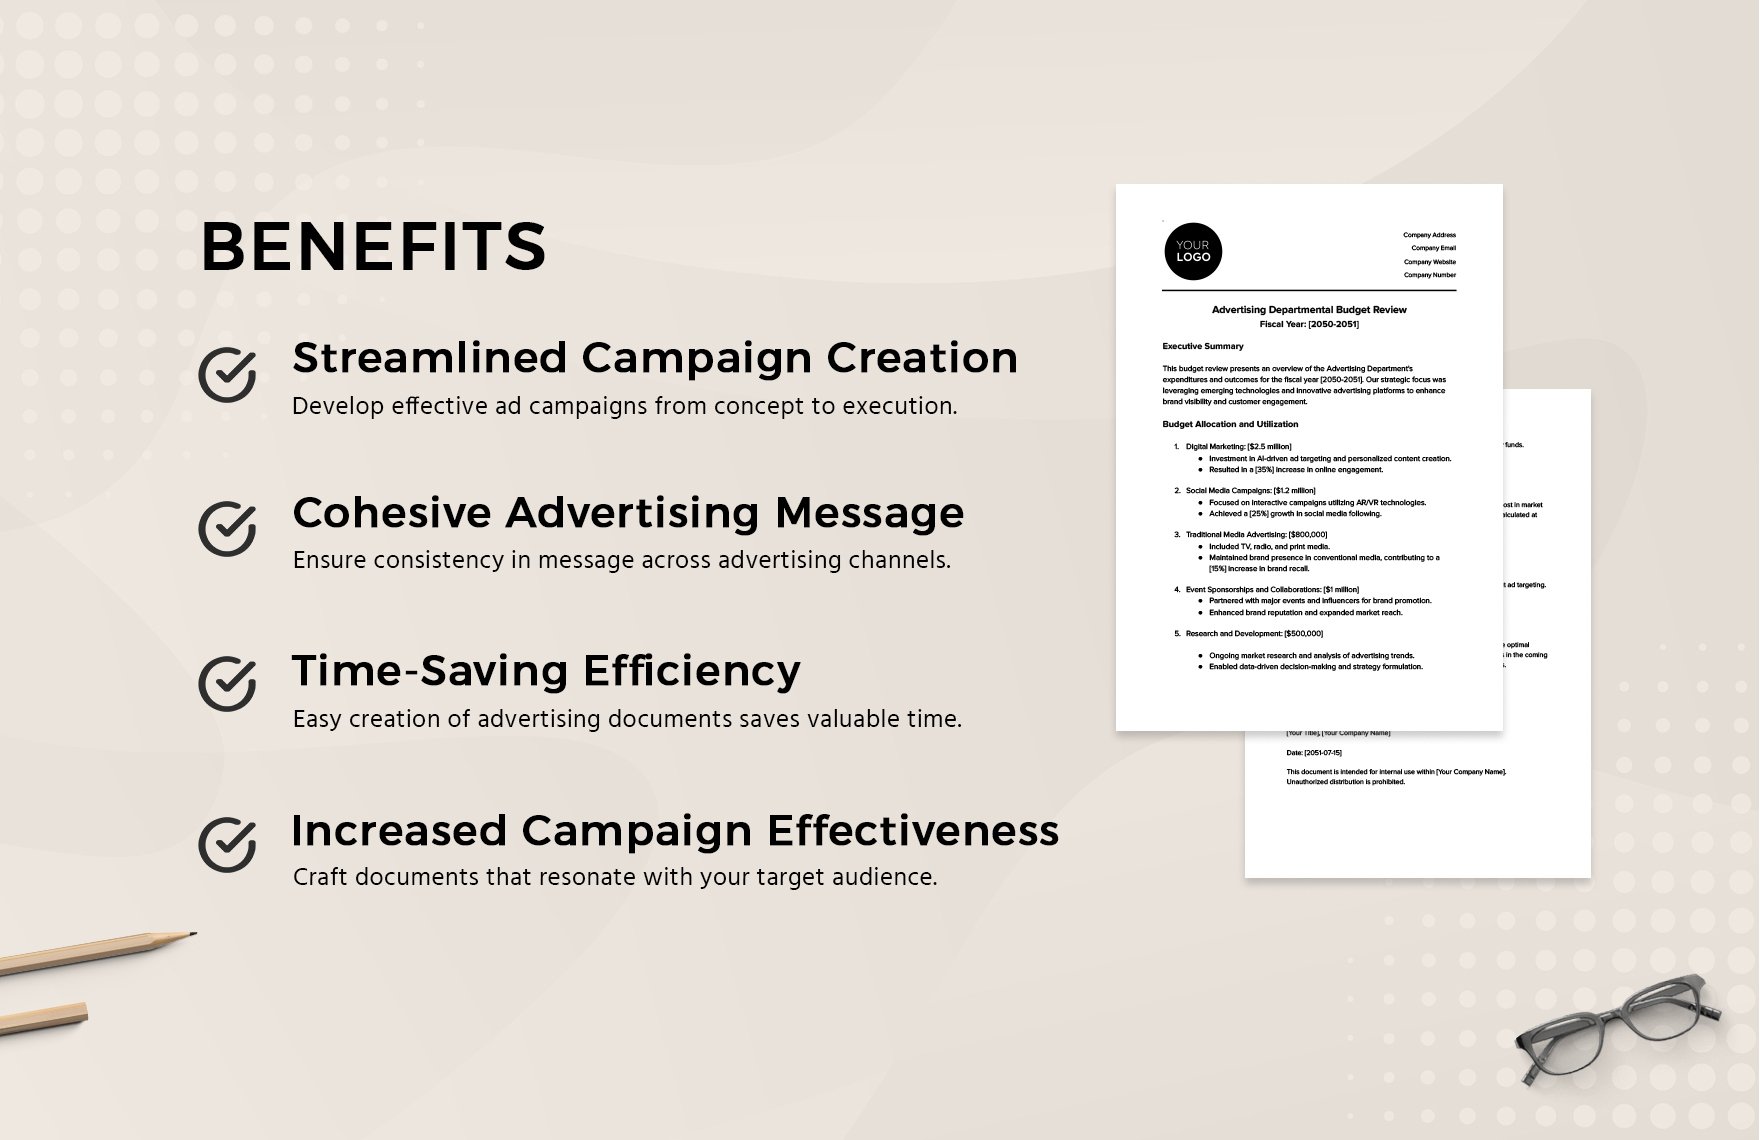 Advertising Departmental Budget Review Template